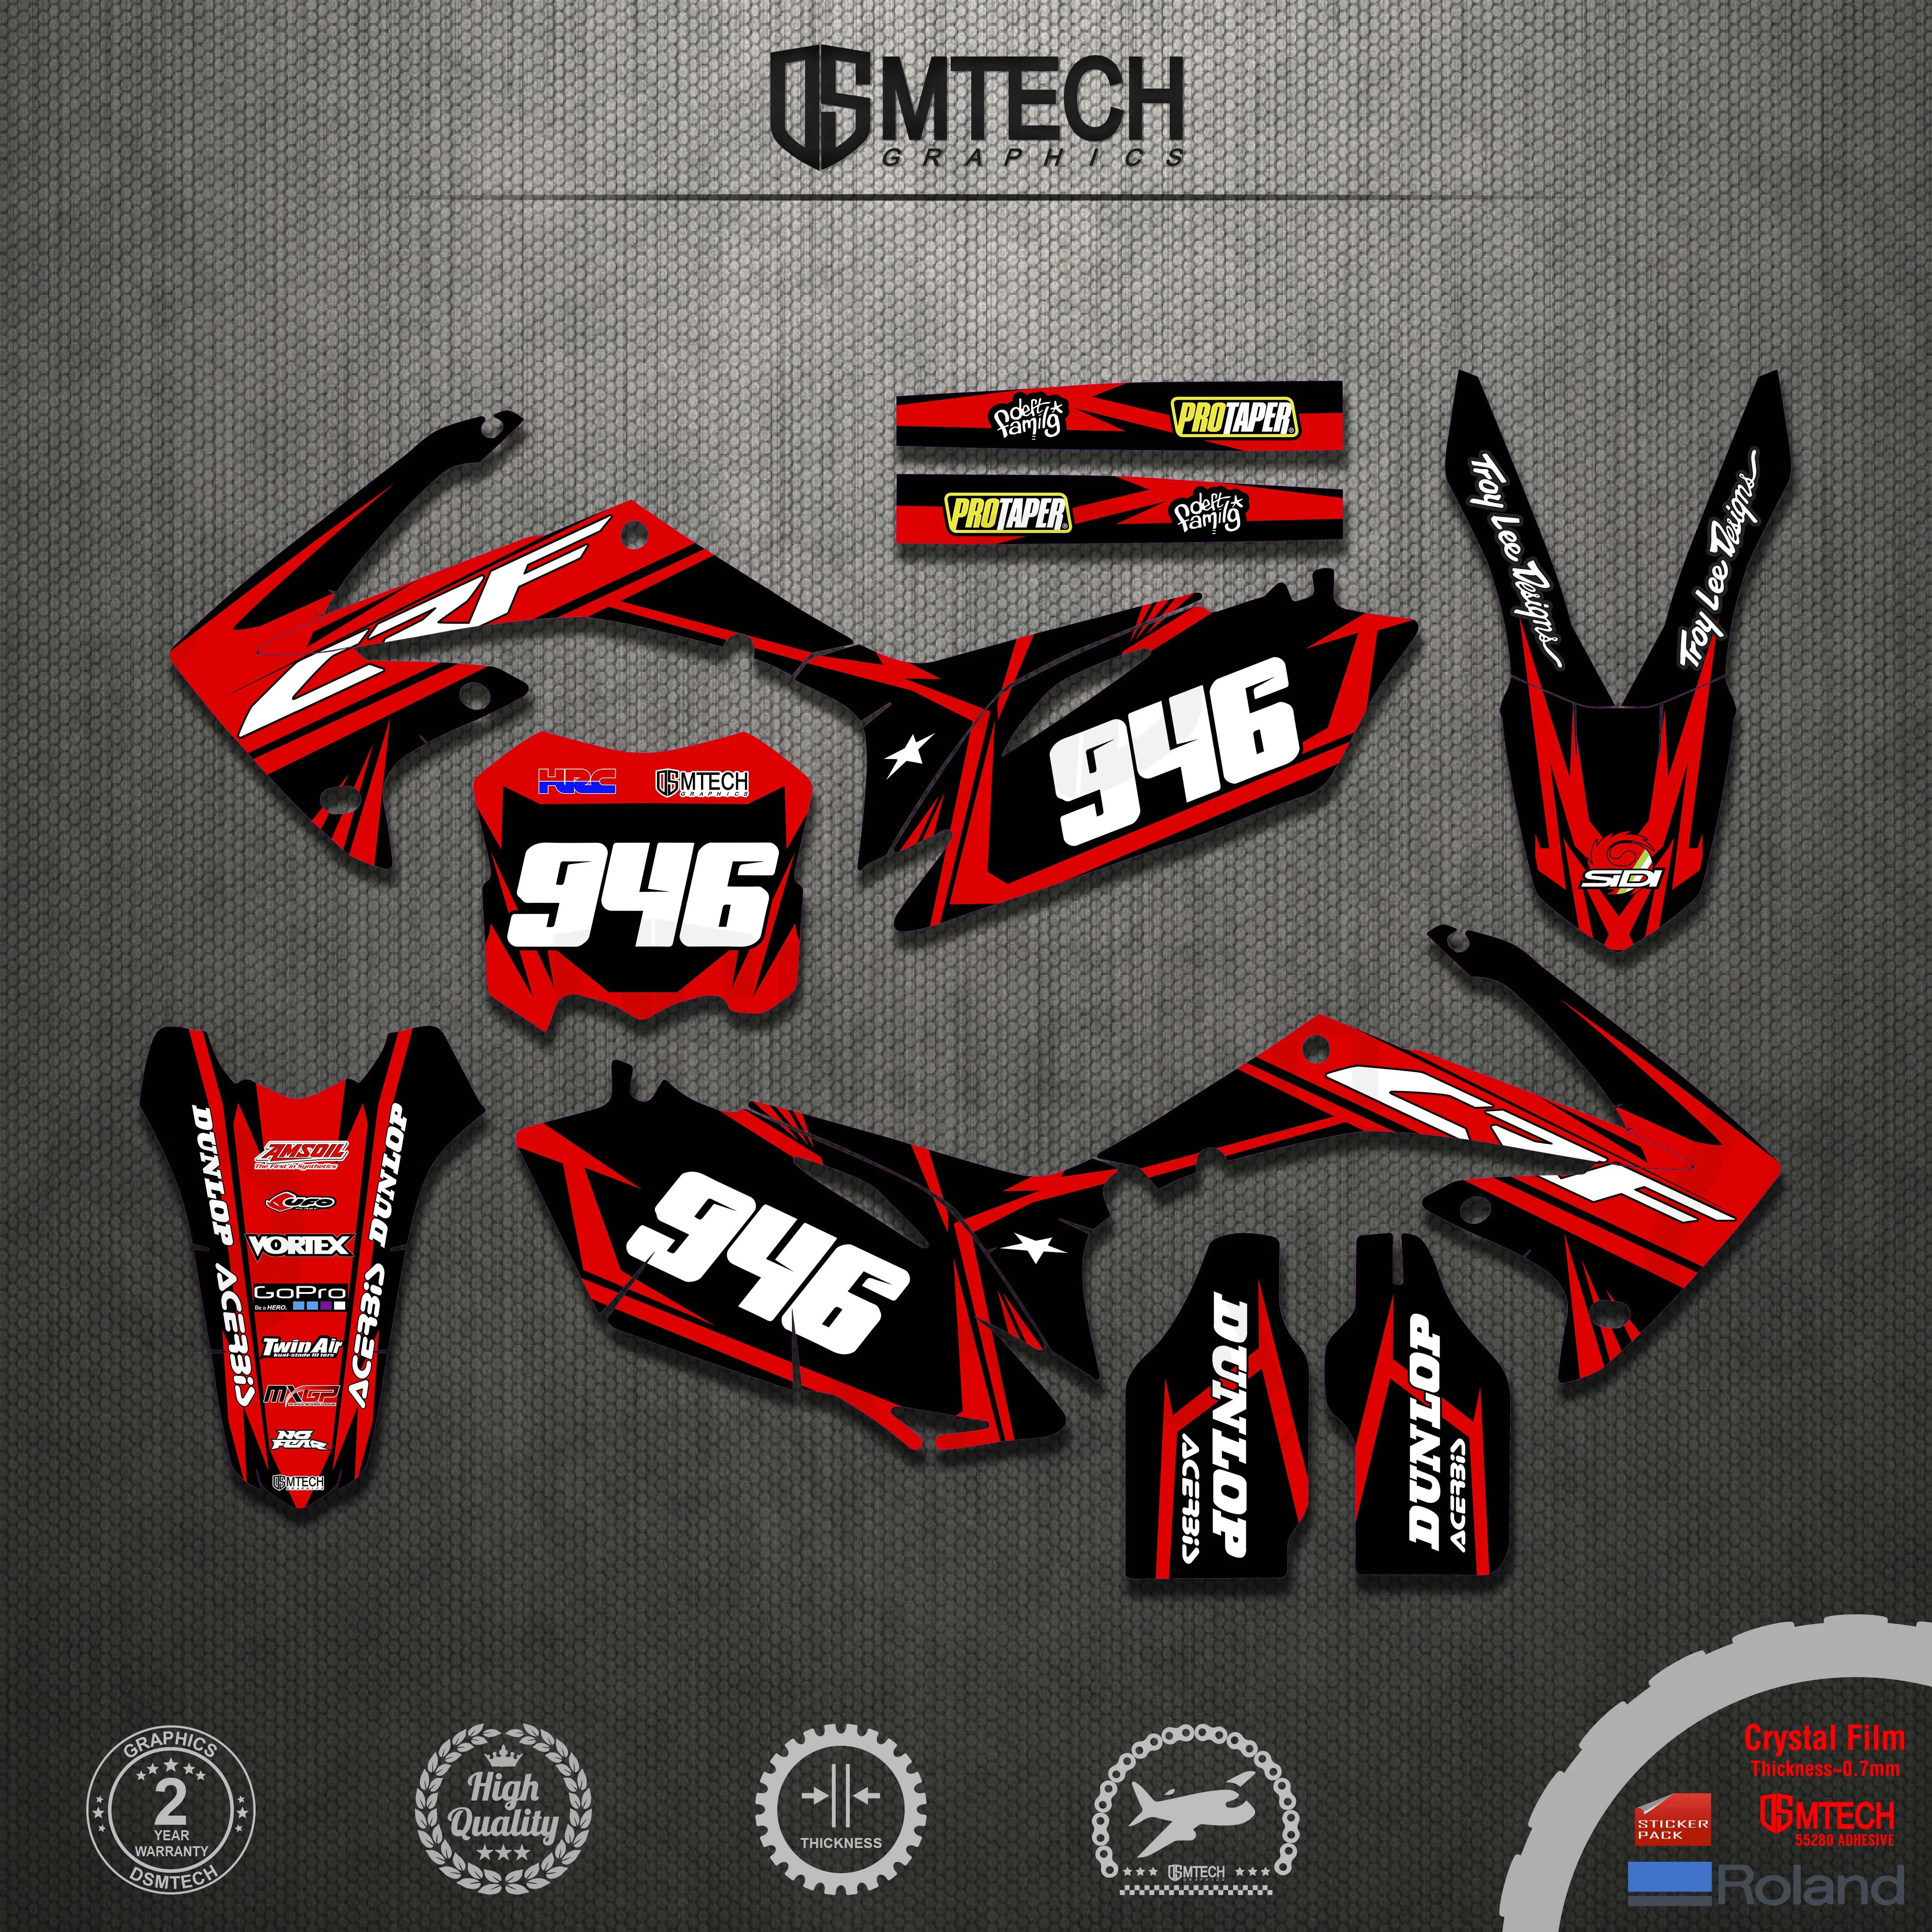 

DS New Style TEAM GRAPHICS DECALS STICKERS Kits for Honda CRF250 CRF250R 2010 2011 2012 2013 CRF450 CRF450R 2009 2010 2011 2012